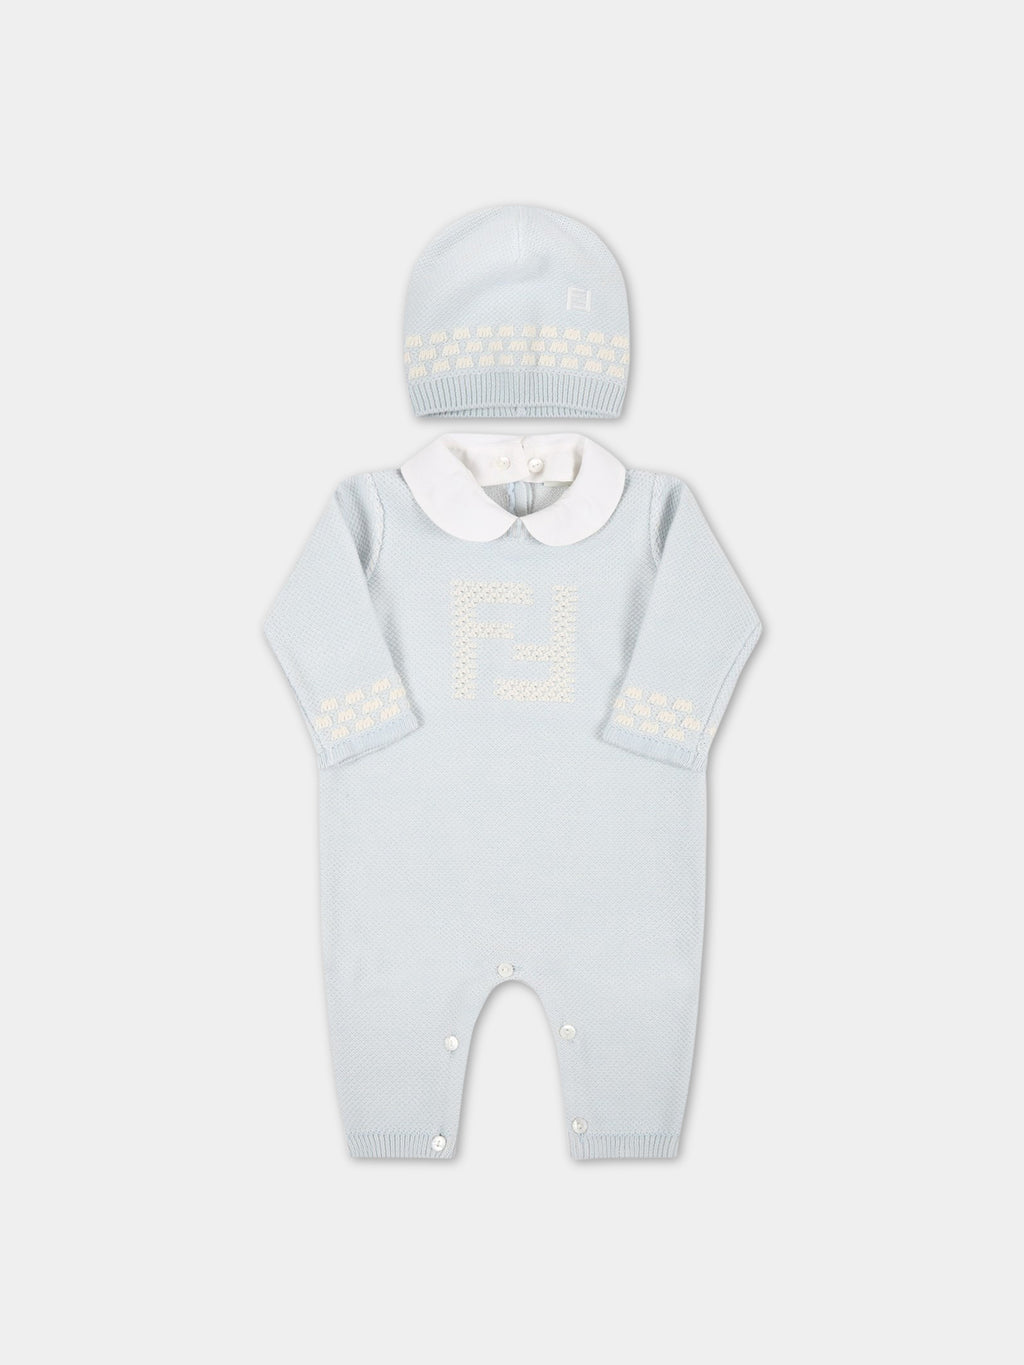 Light-blue set for baby boy with douple FF